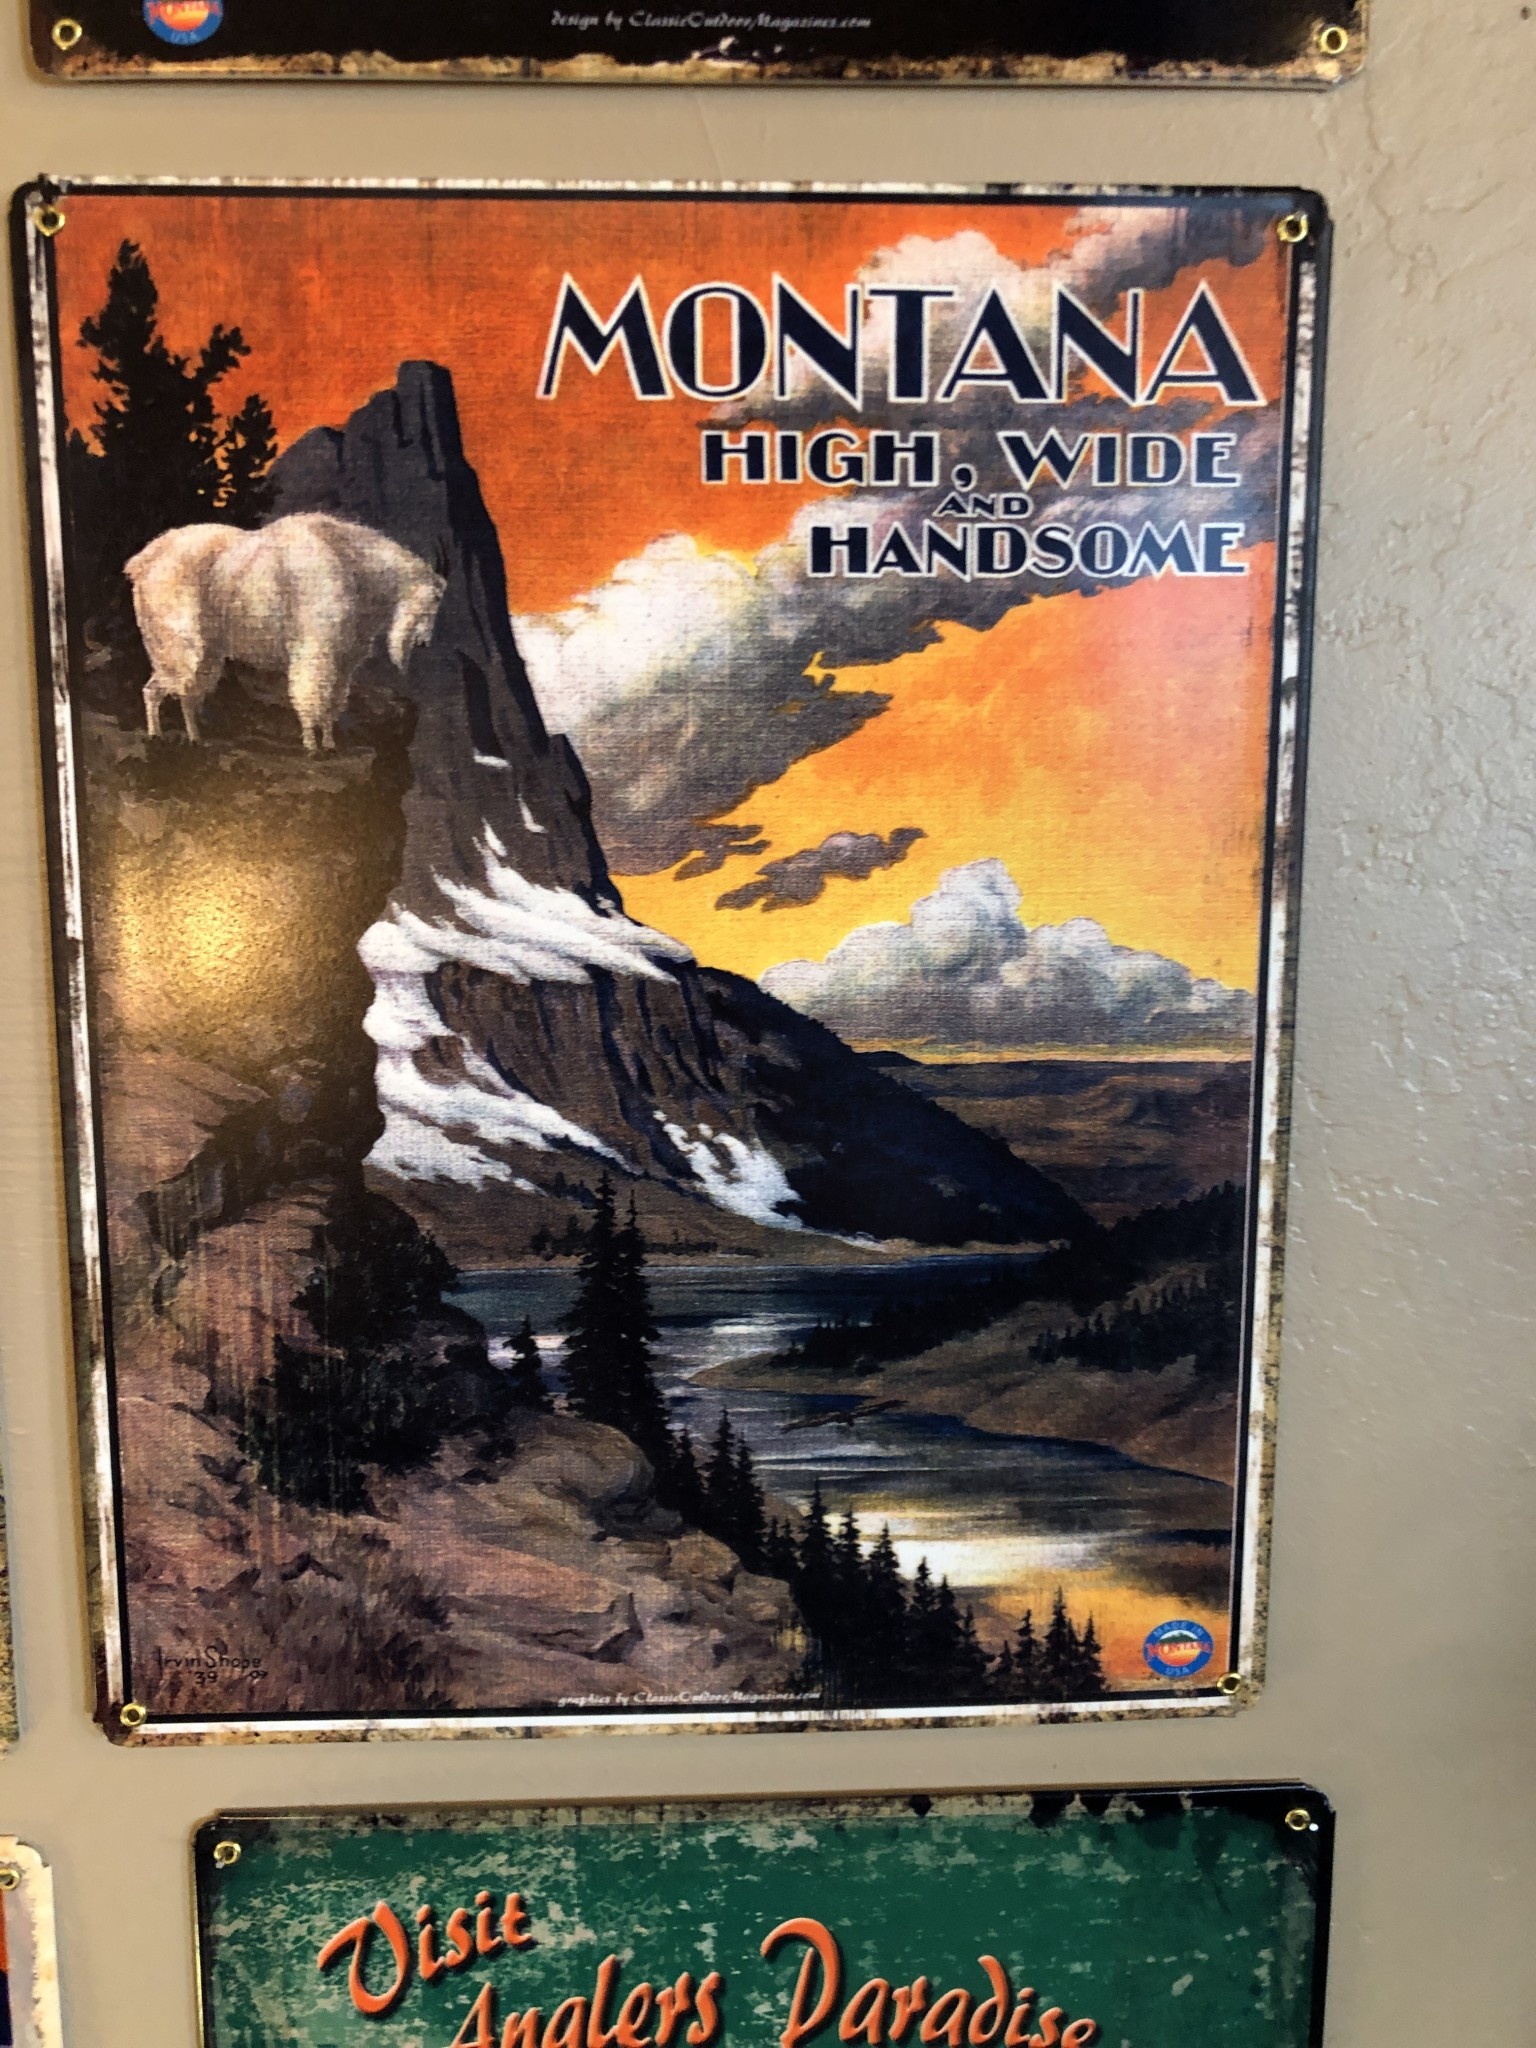 Classic Outdoor Magazines #7 Montana High, Wide & Handsome 12x15 Metal Sign